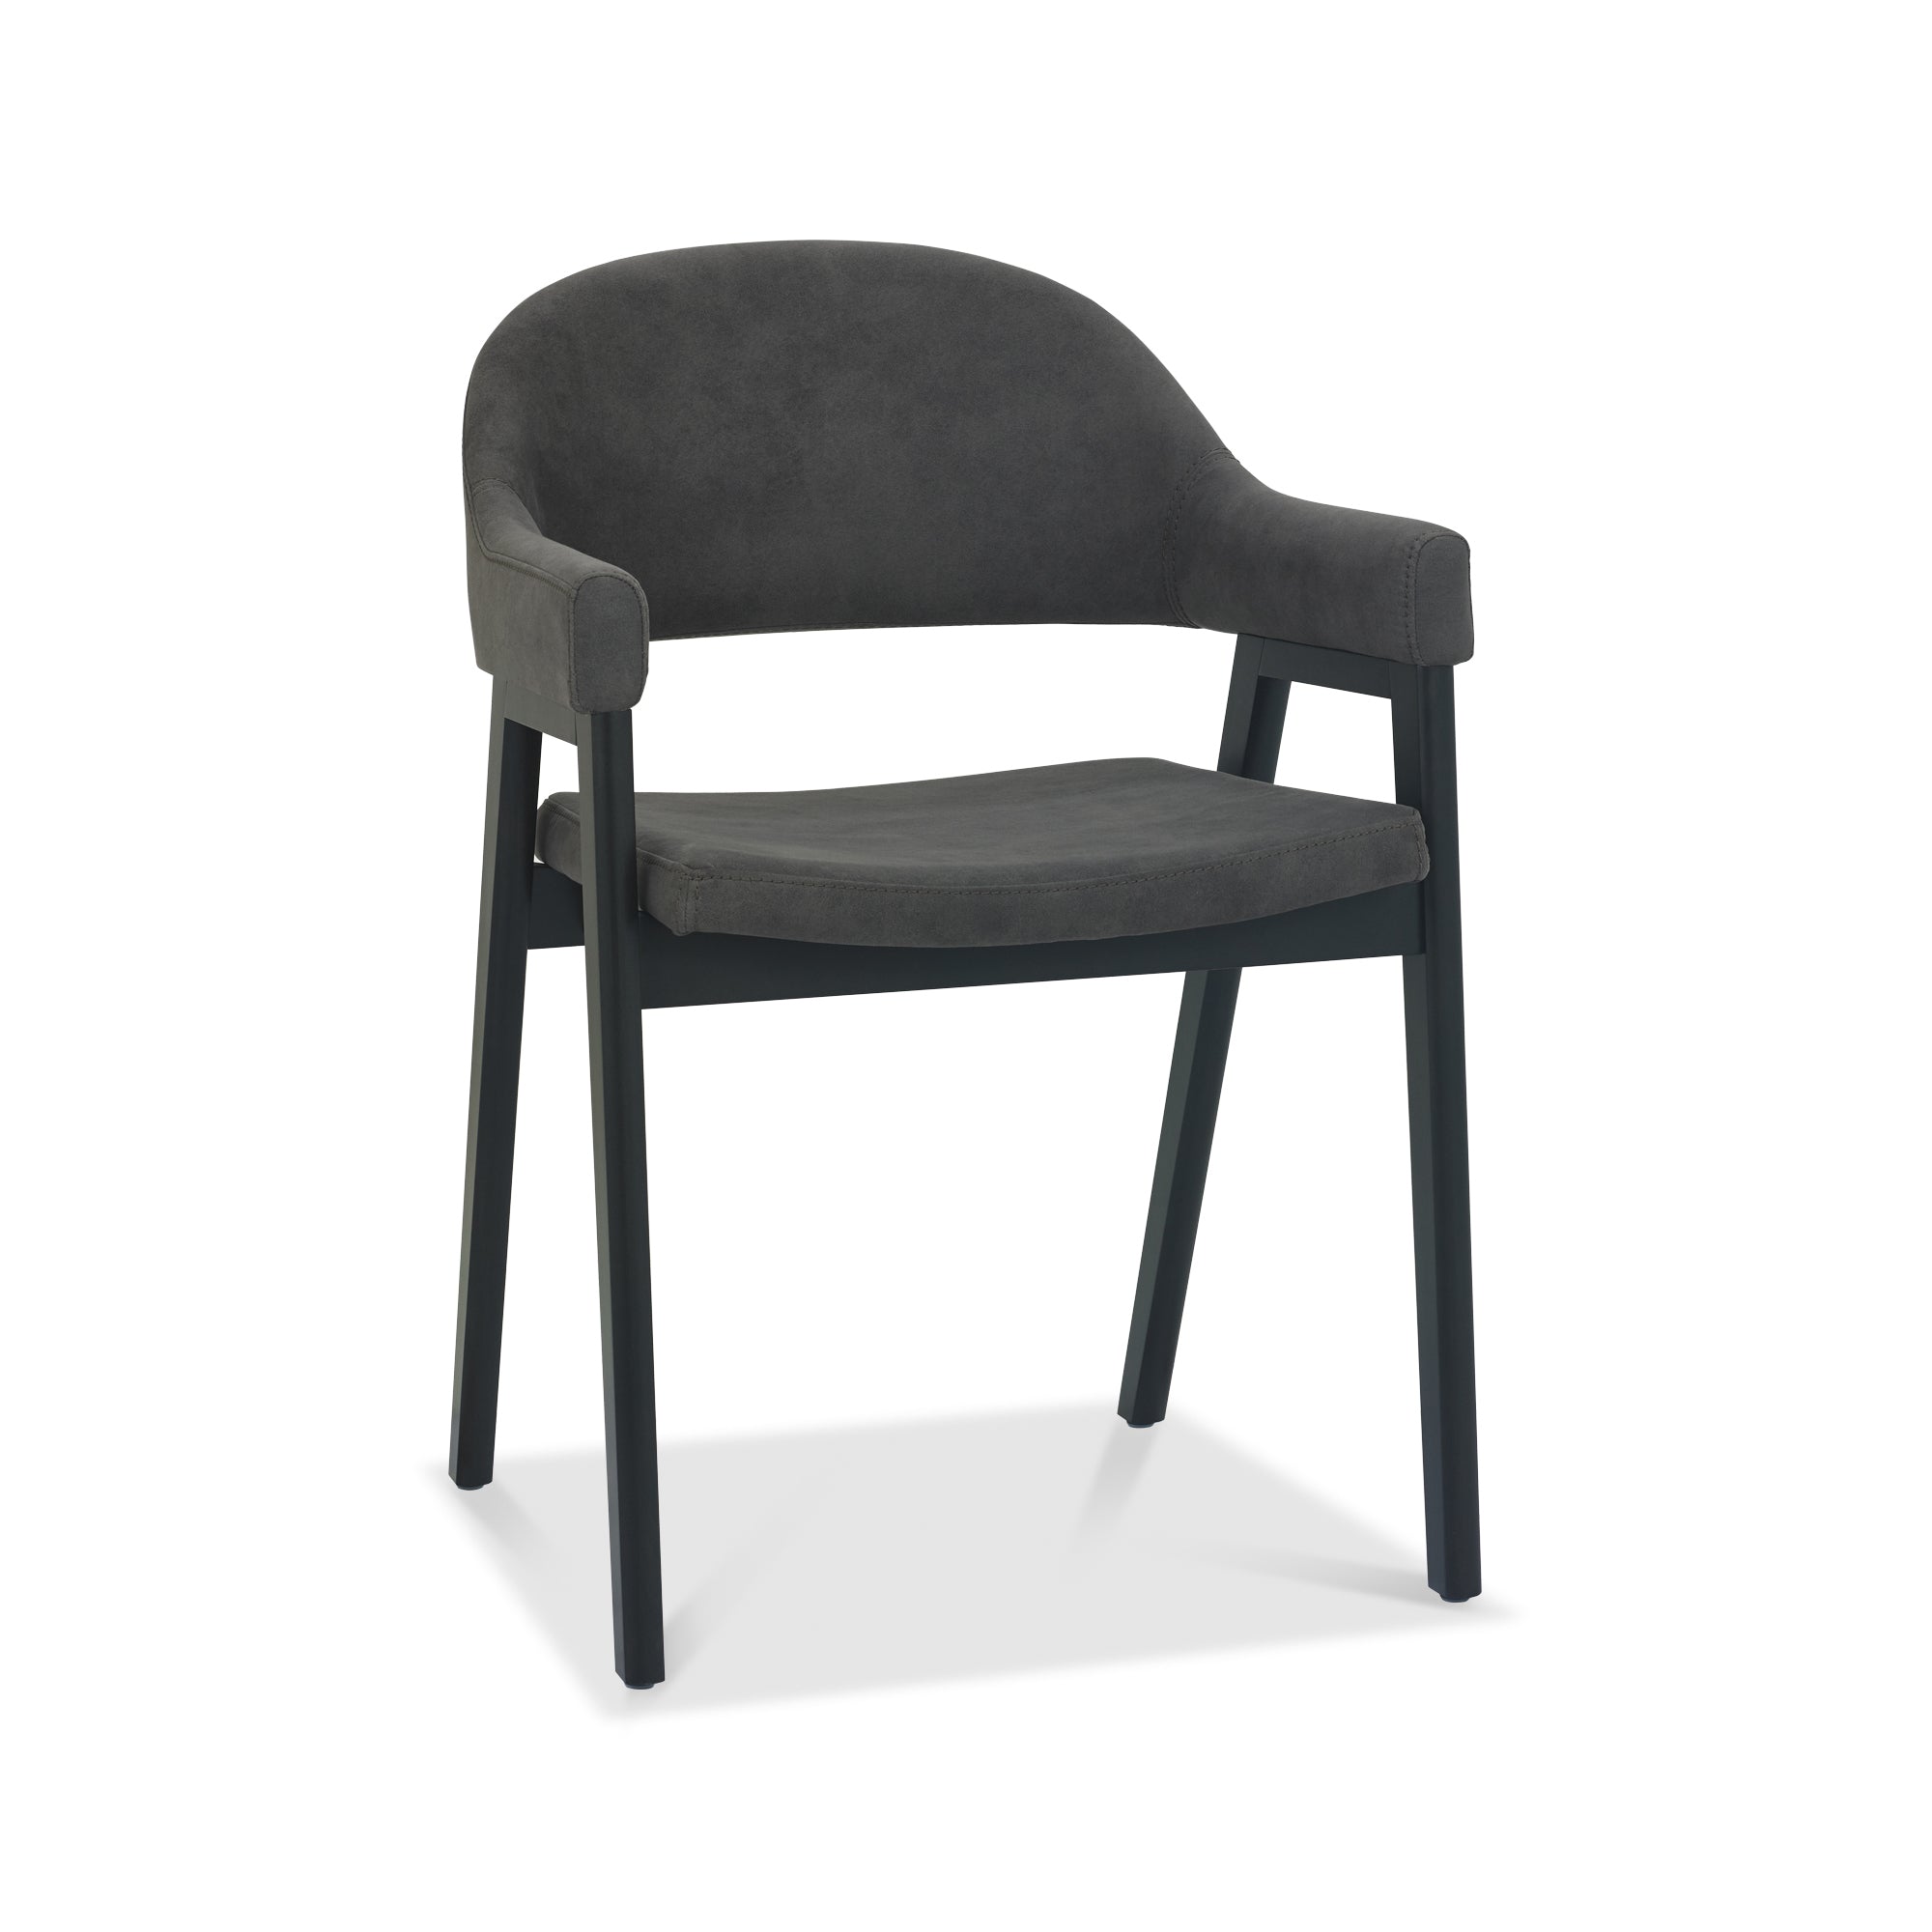 Candice Weathered Oak Upholstered Arm Chair - Dark Grey Fabric (PAIR)